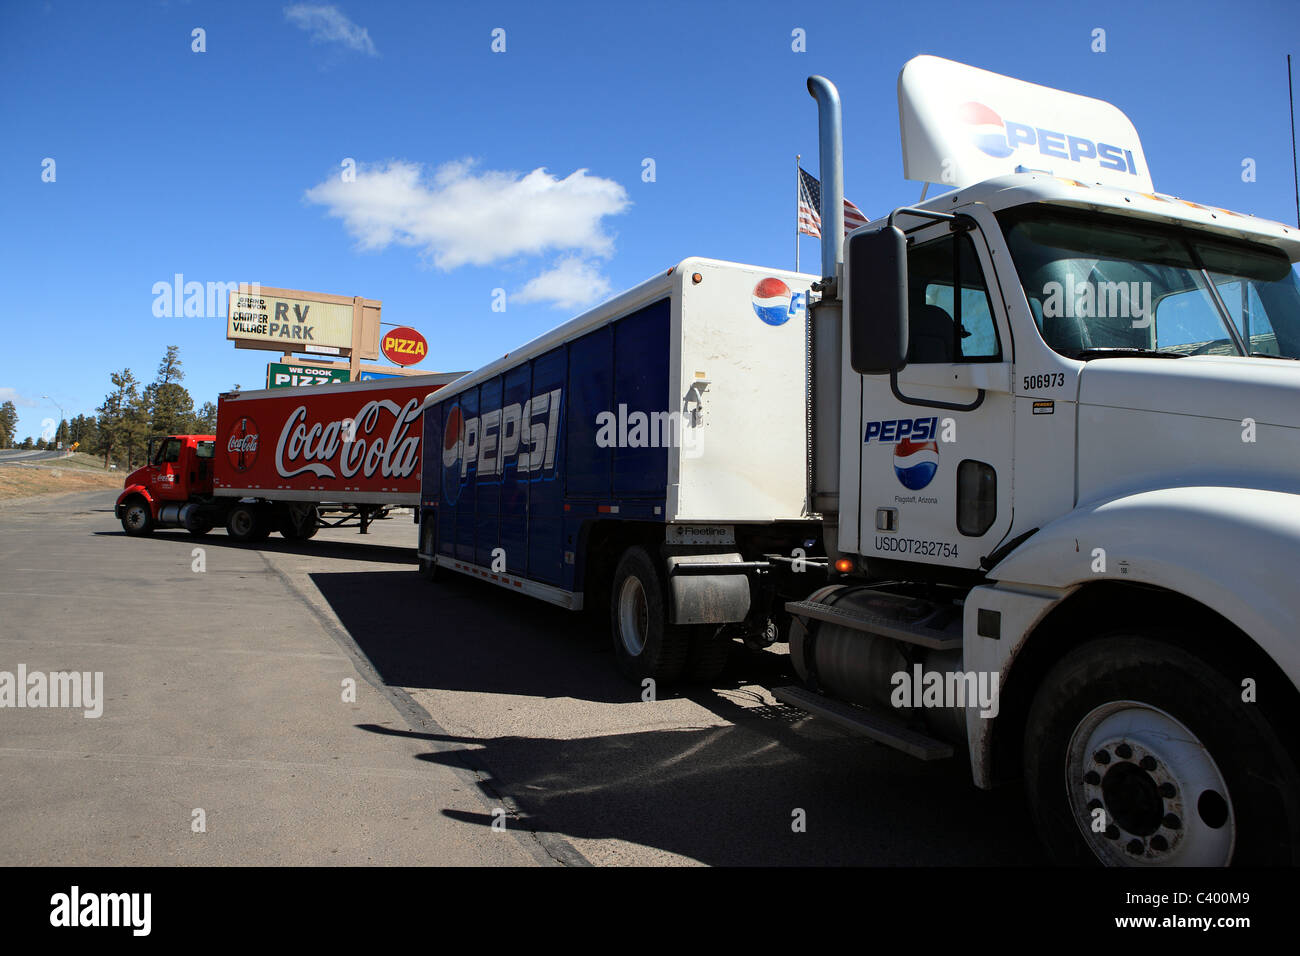 Pepsi and Coca-Cola lorries in an RV Park in Arizona, USA Stock Photo